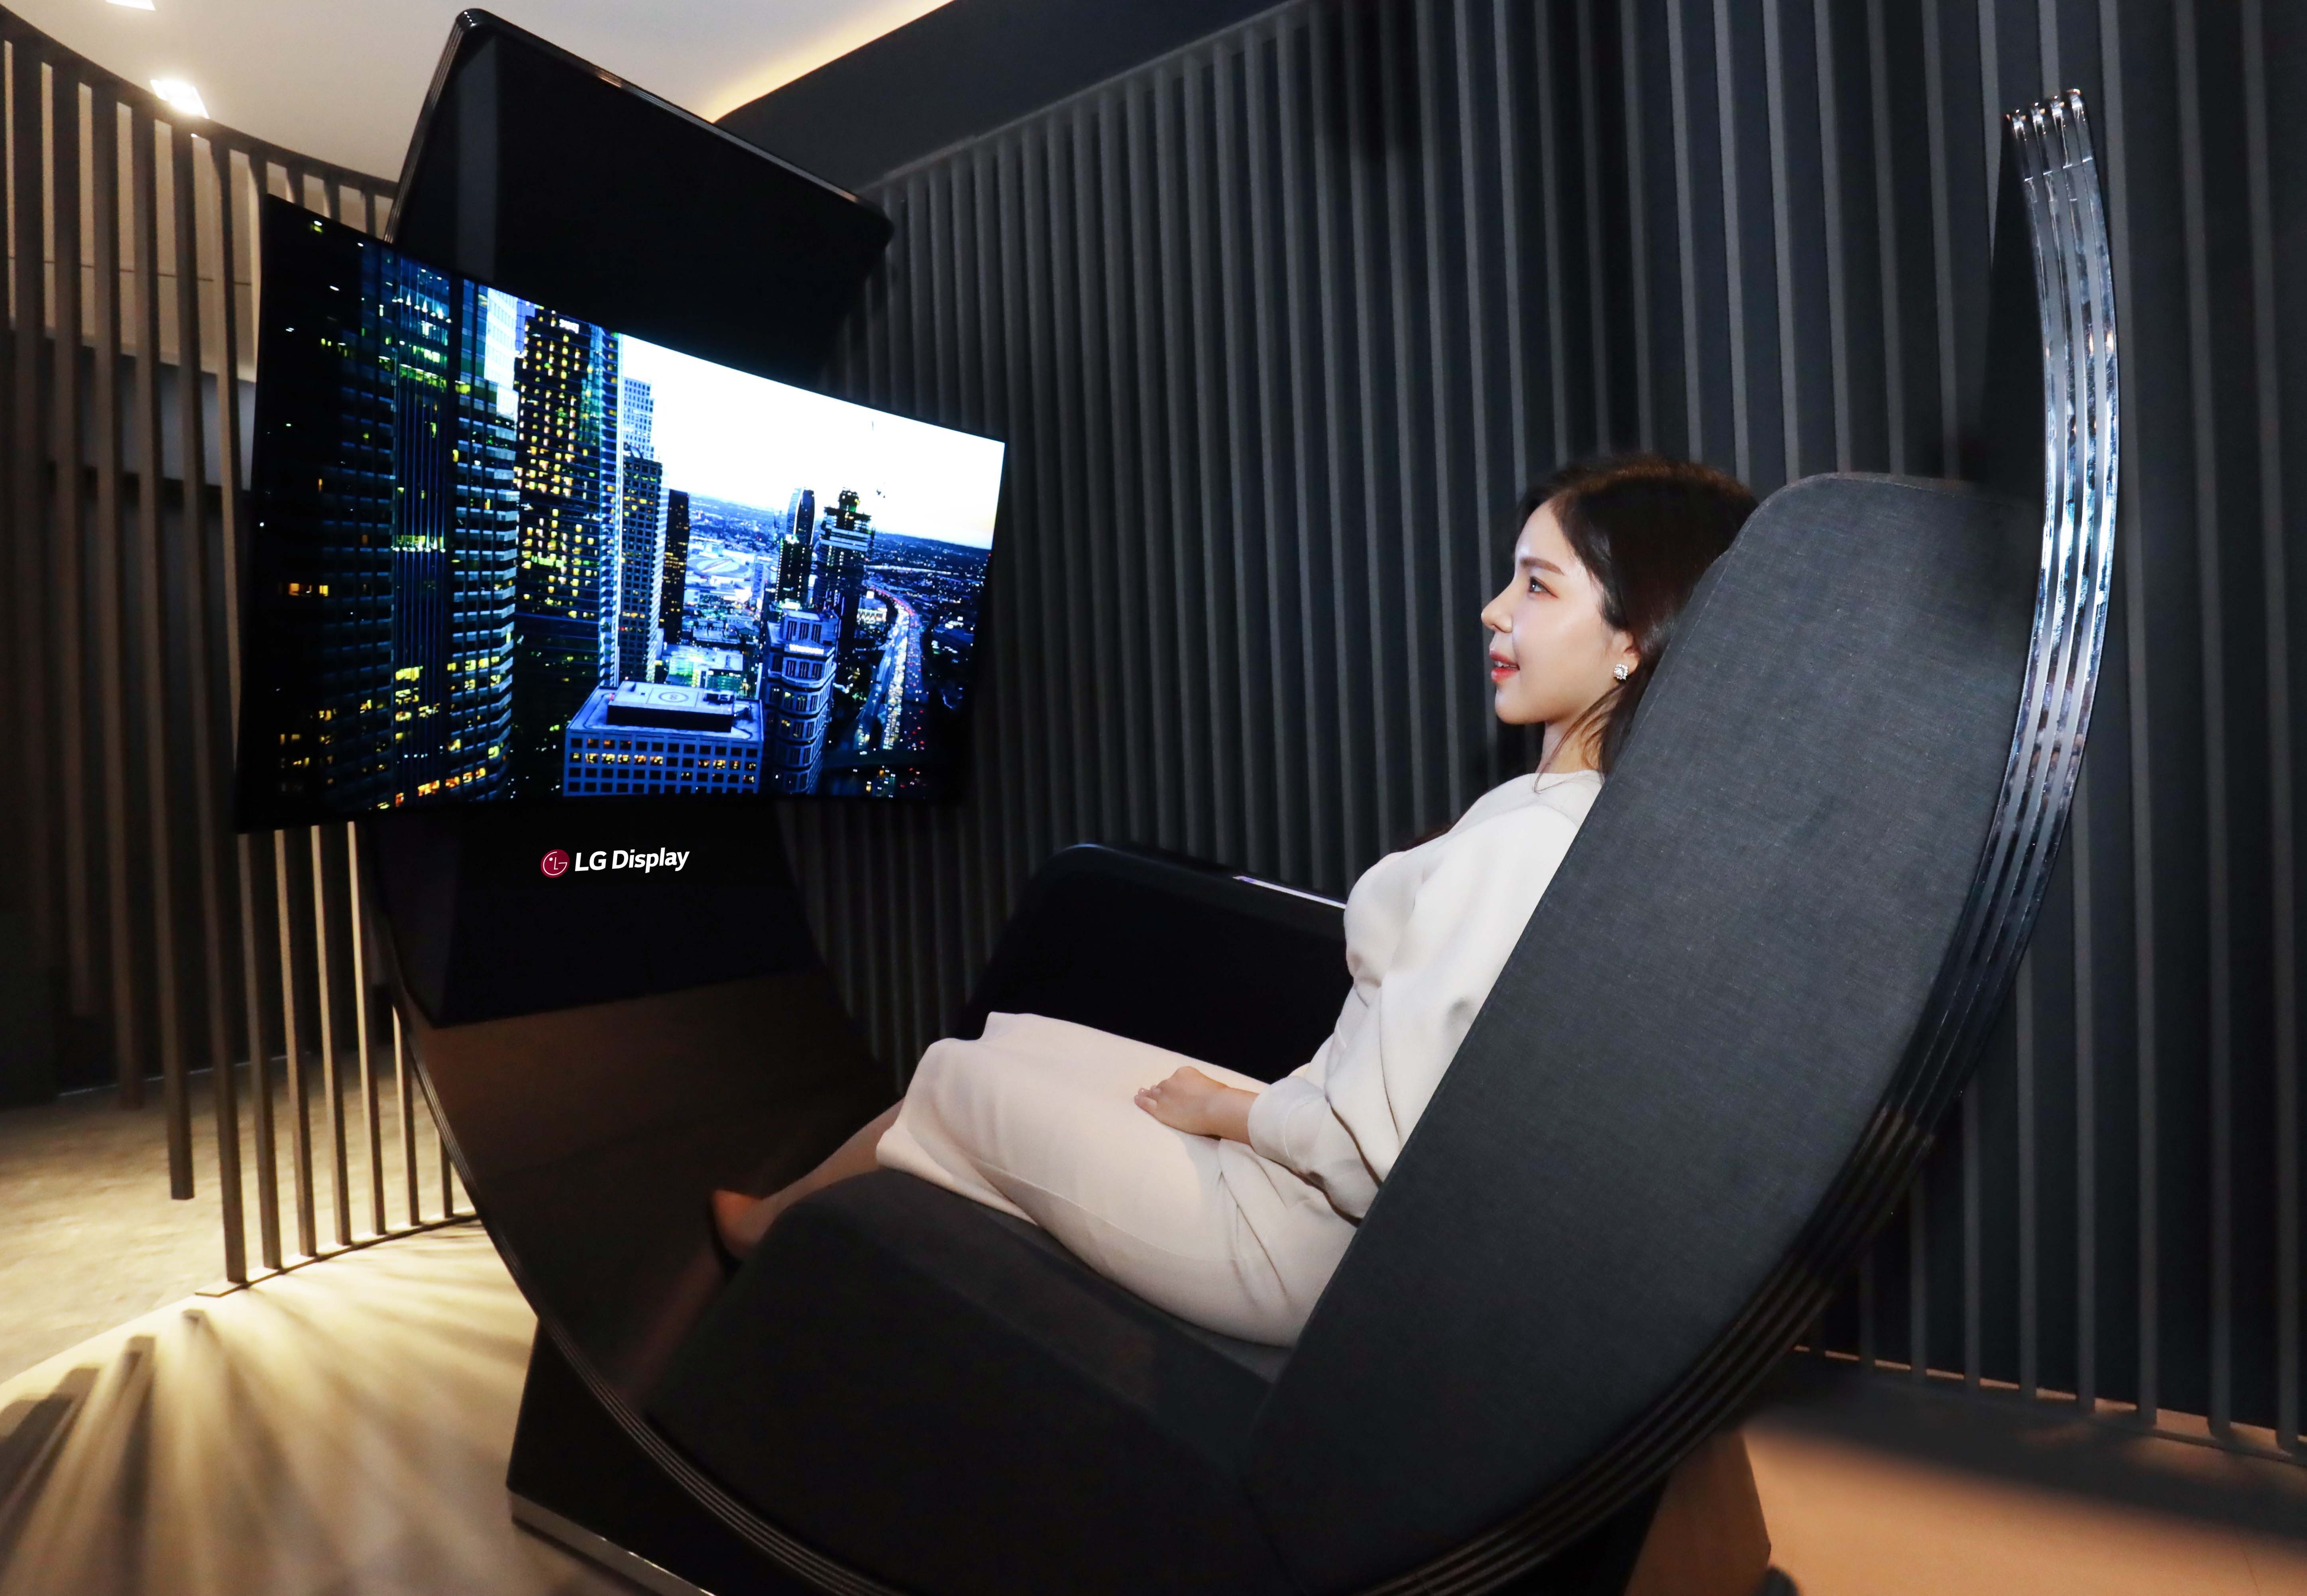 LG Display_Media Chair at CES 2022